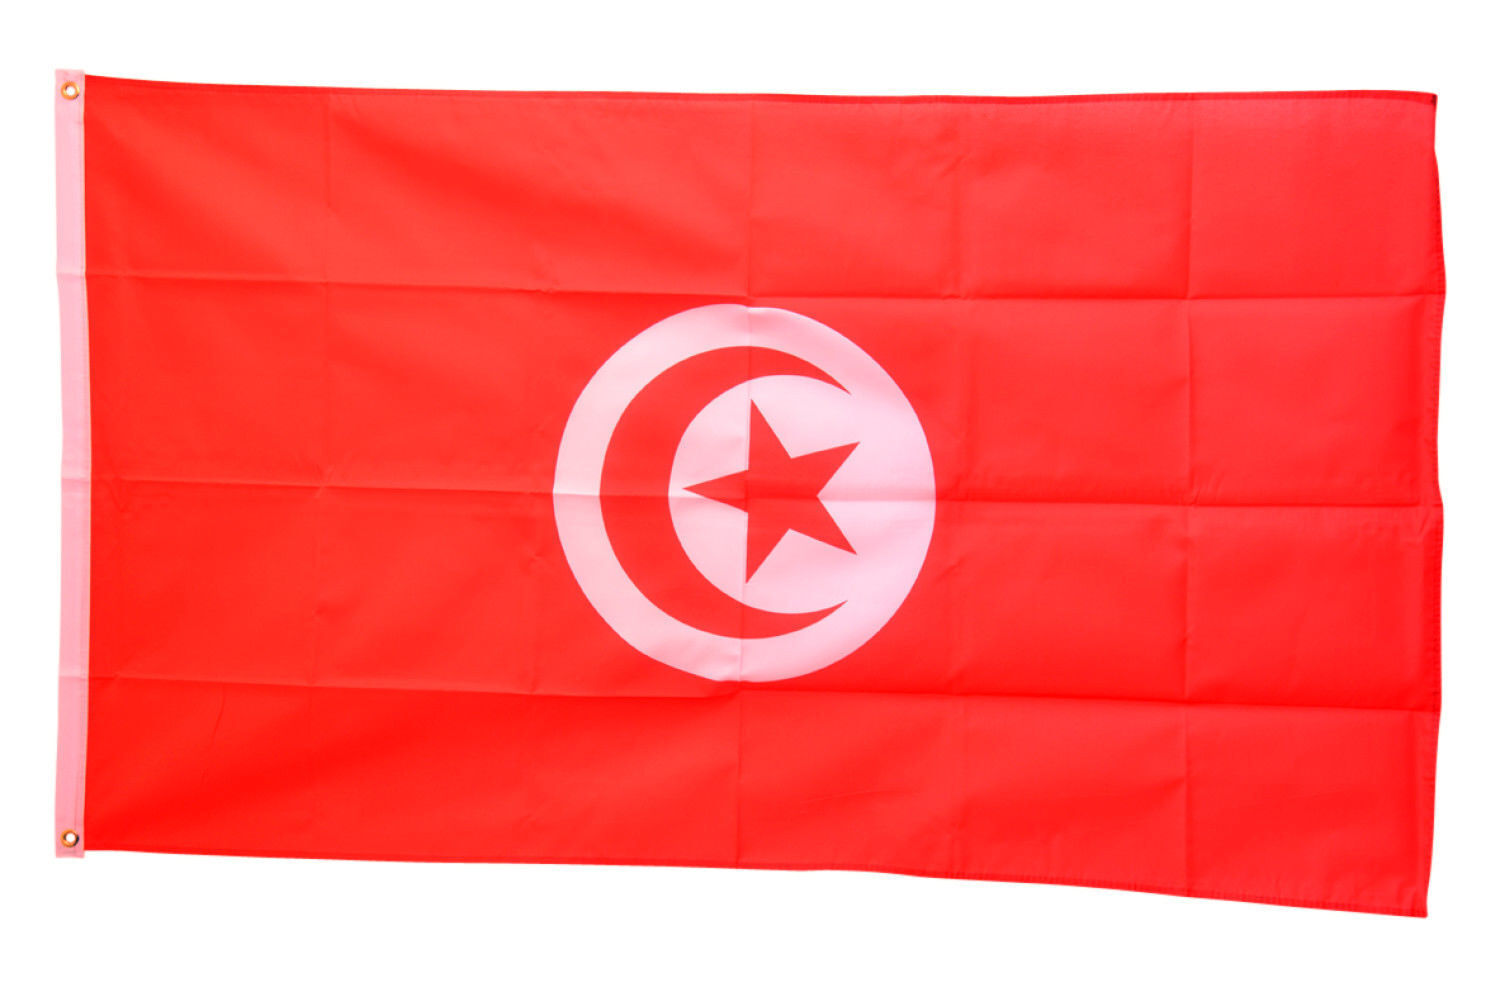 Tunisia Flags & Bunting - 5x3' 3x2' Giant 8x5' Table Hand - Country